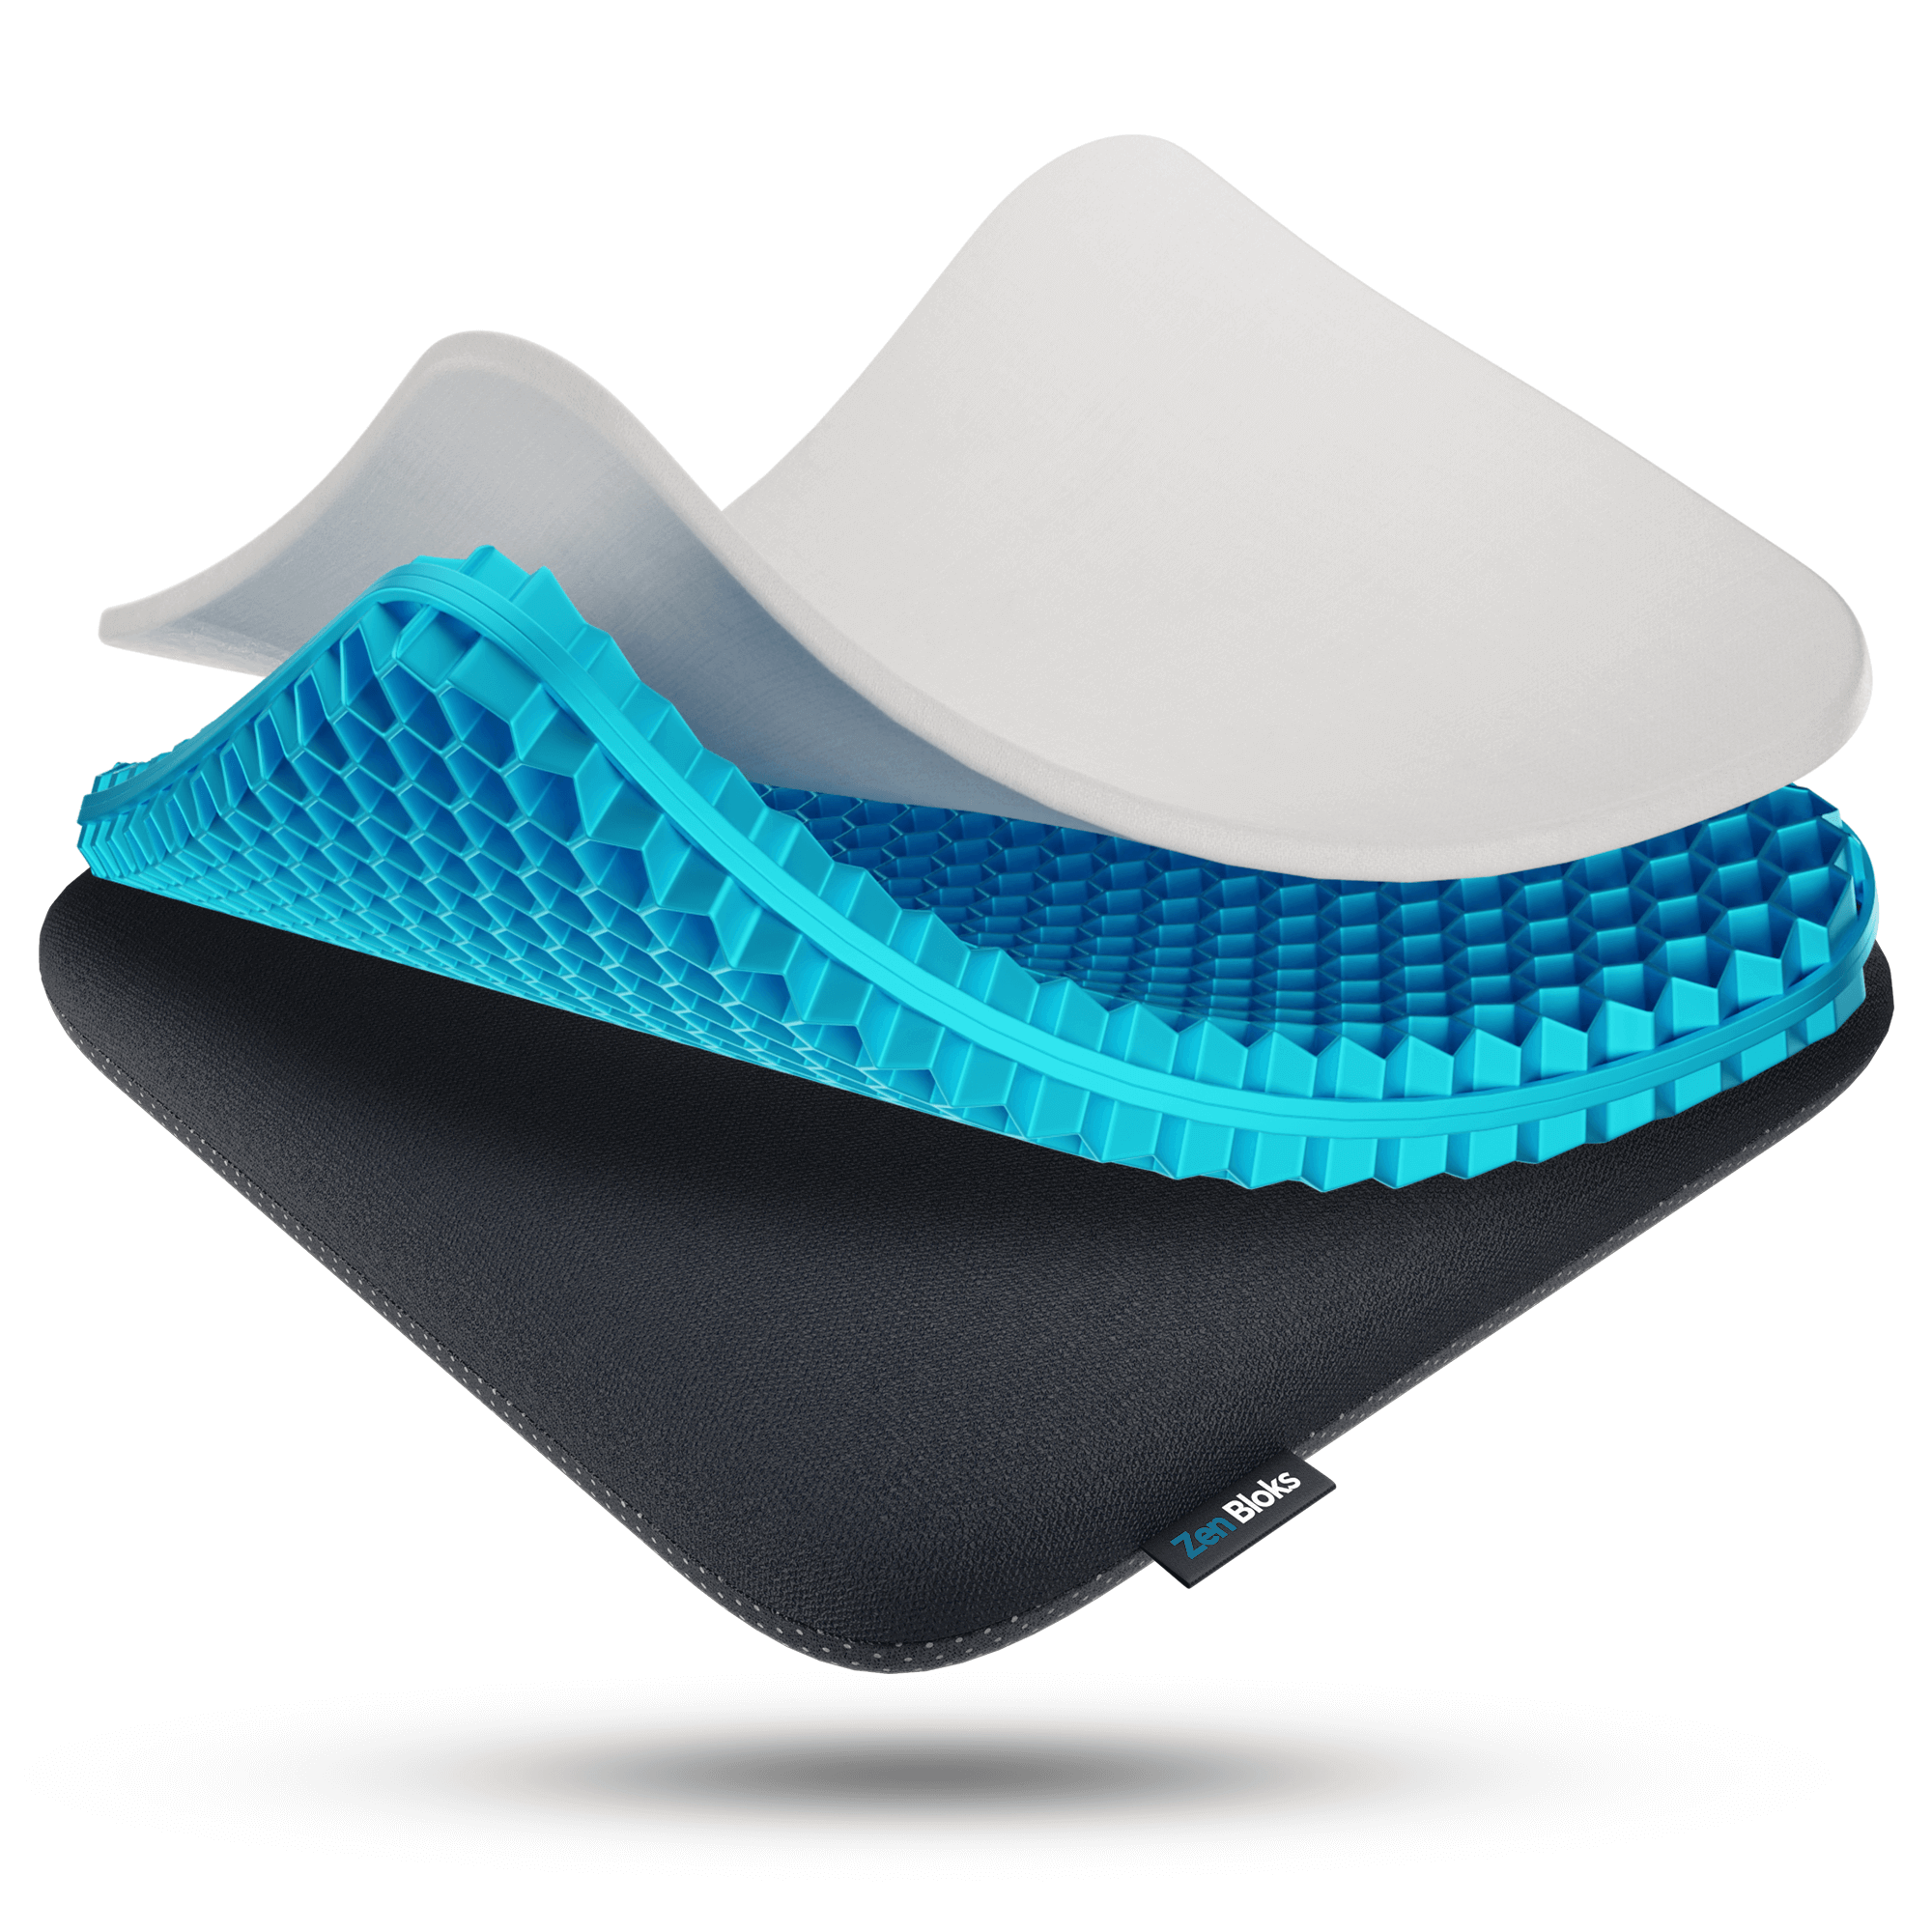 Zen Bloks XL Extra Thick Gel Seat Cushion for Extended Sitting, Office, Back, Tailbone, Sciatica, Coccyx, and Hip Pain Relief - Non-Slip for Wheelchairs, Car Seat for Driving (20"x20"x2")